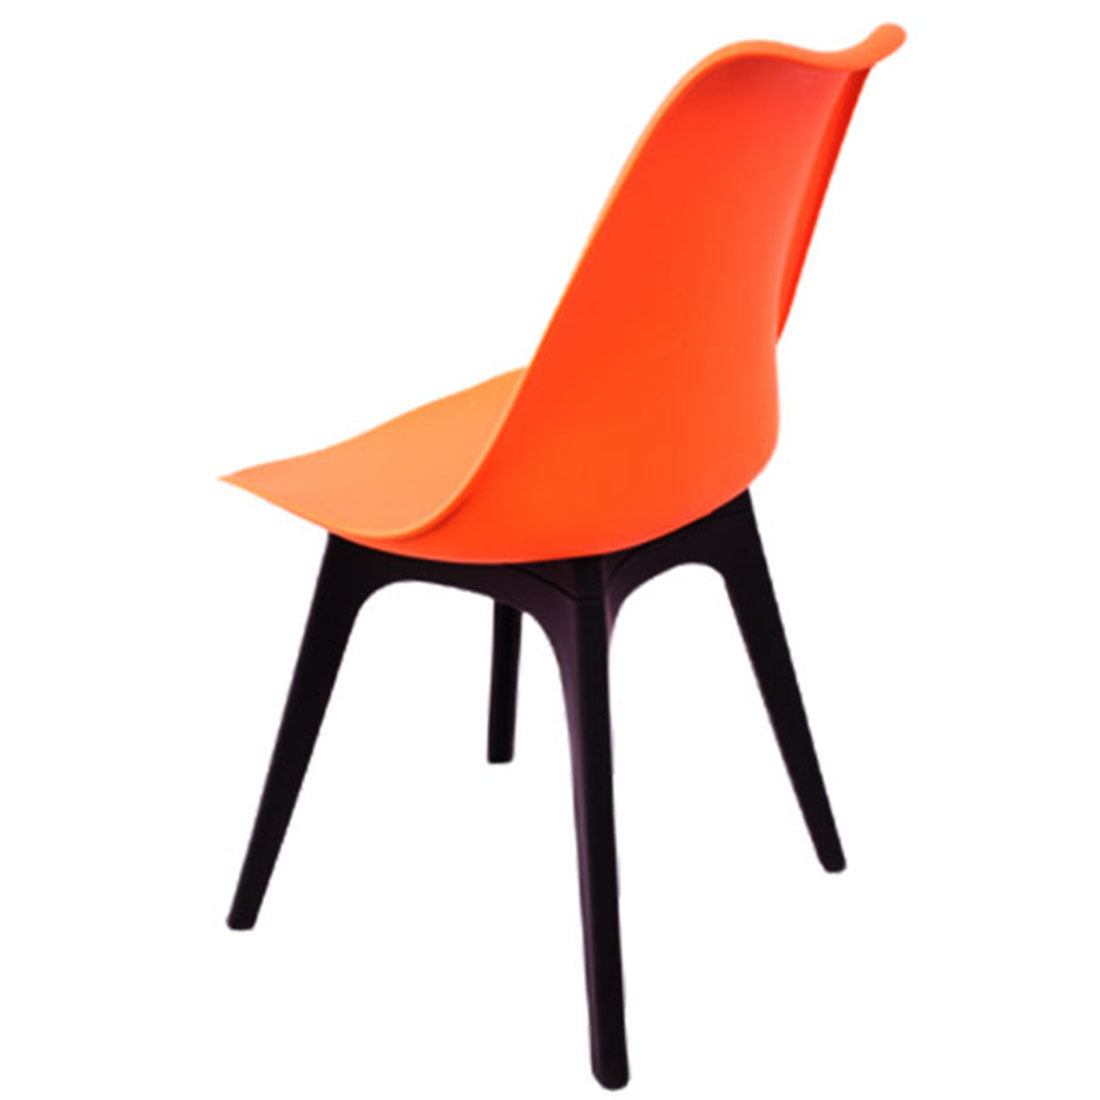 Dining Chair Wood Base Plastic Cafeteria Chair (Orange)